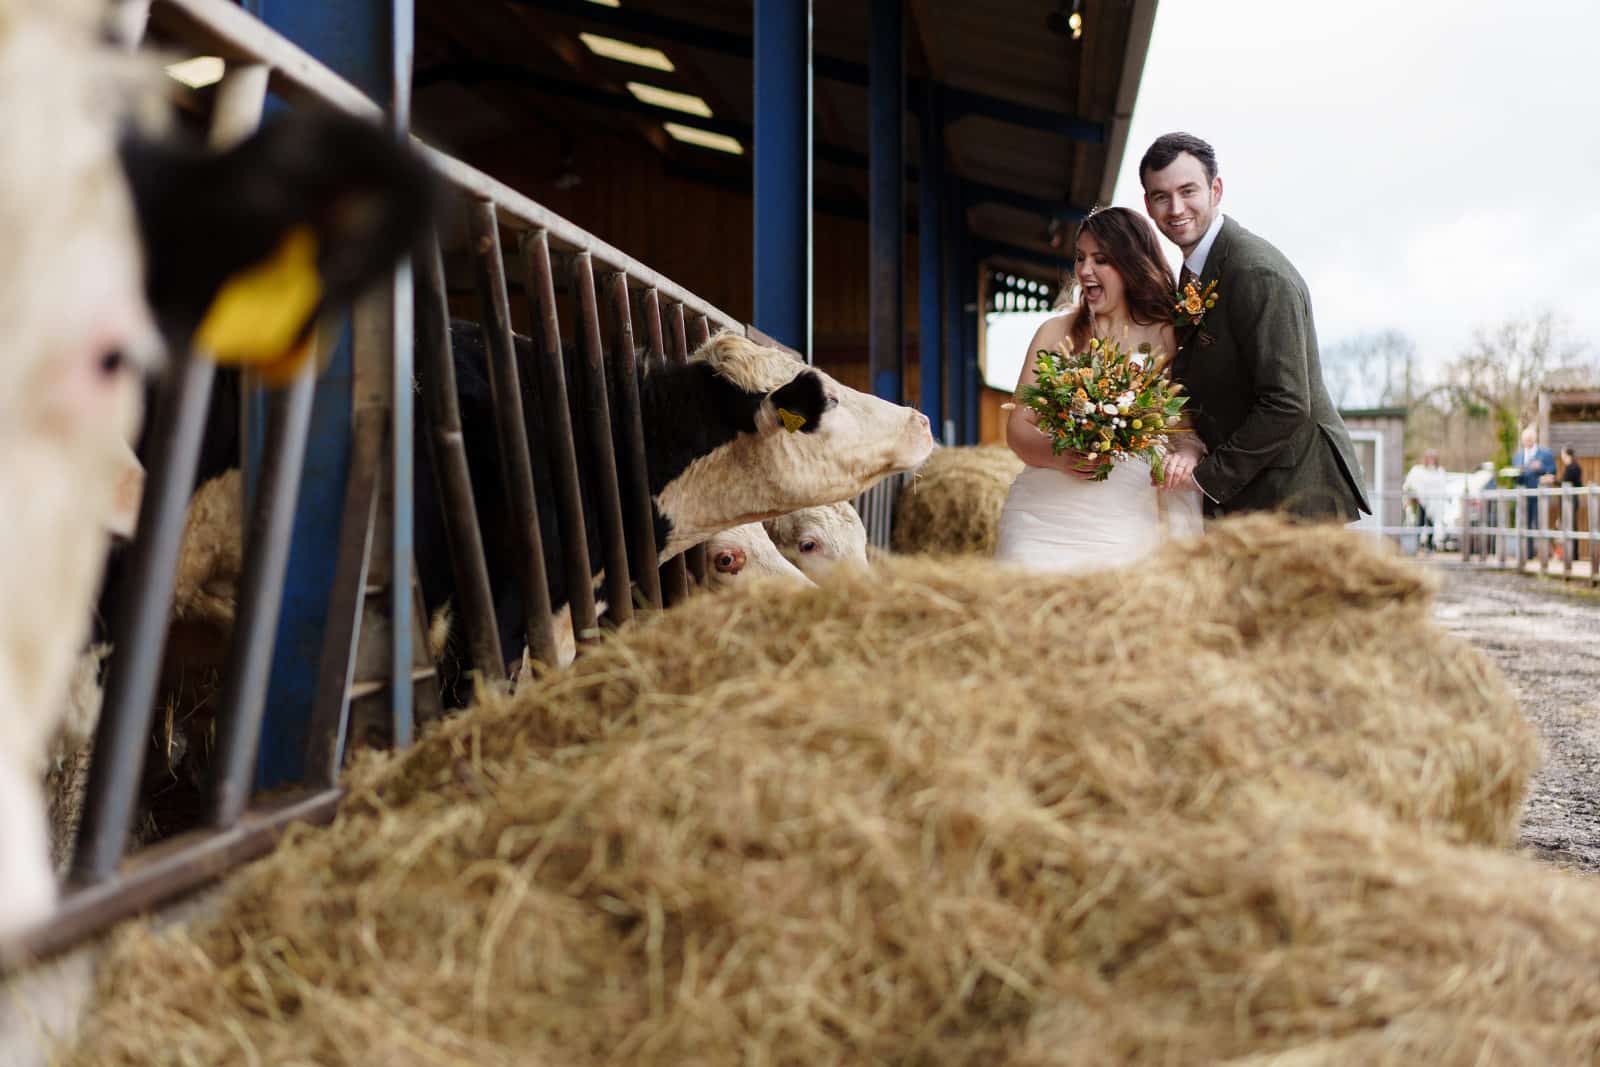 a bride and groom standing next to cows in a barn.